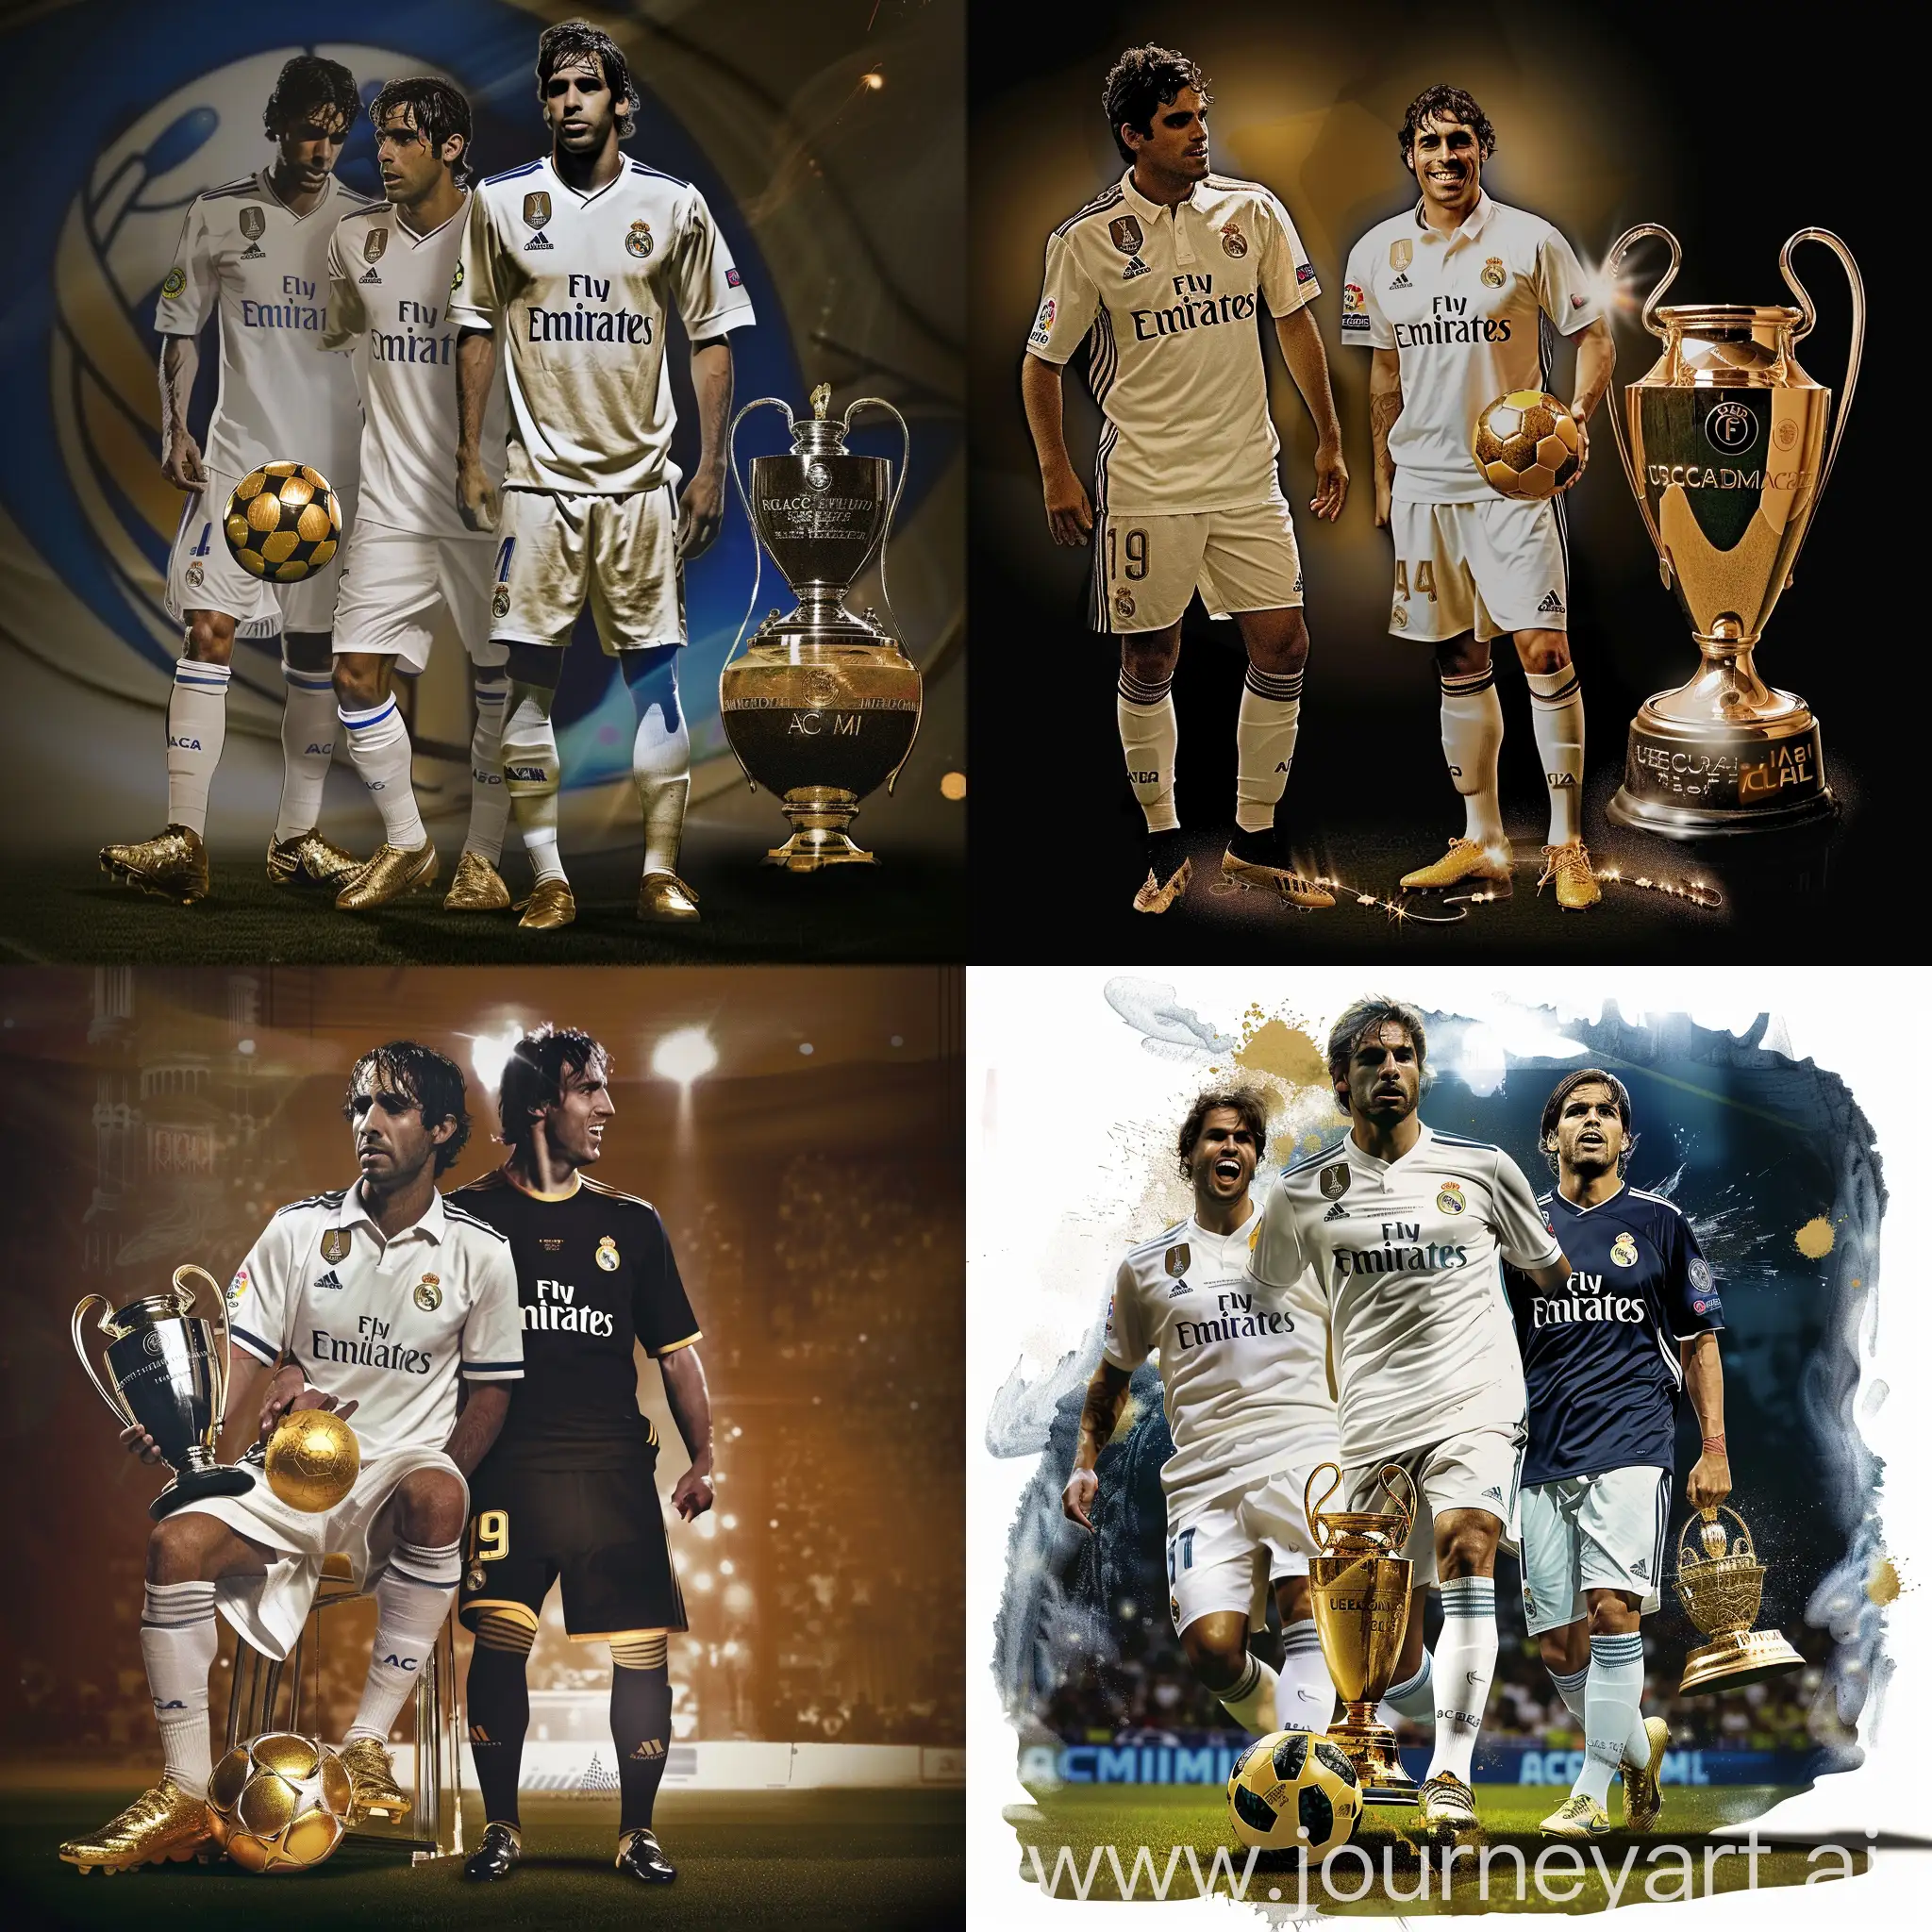 Ricardo-Kaka-in-Real-Madrid-and-AC-Milan-Shirts-with-Golden-Ball-Shoes-and-UEFA-Champions-League-Trophy